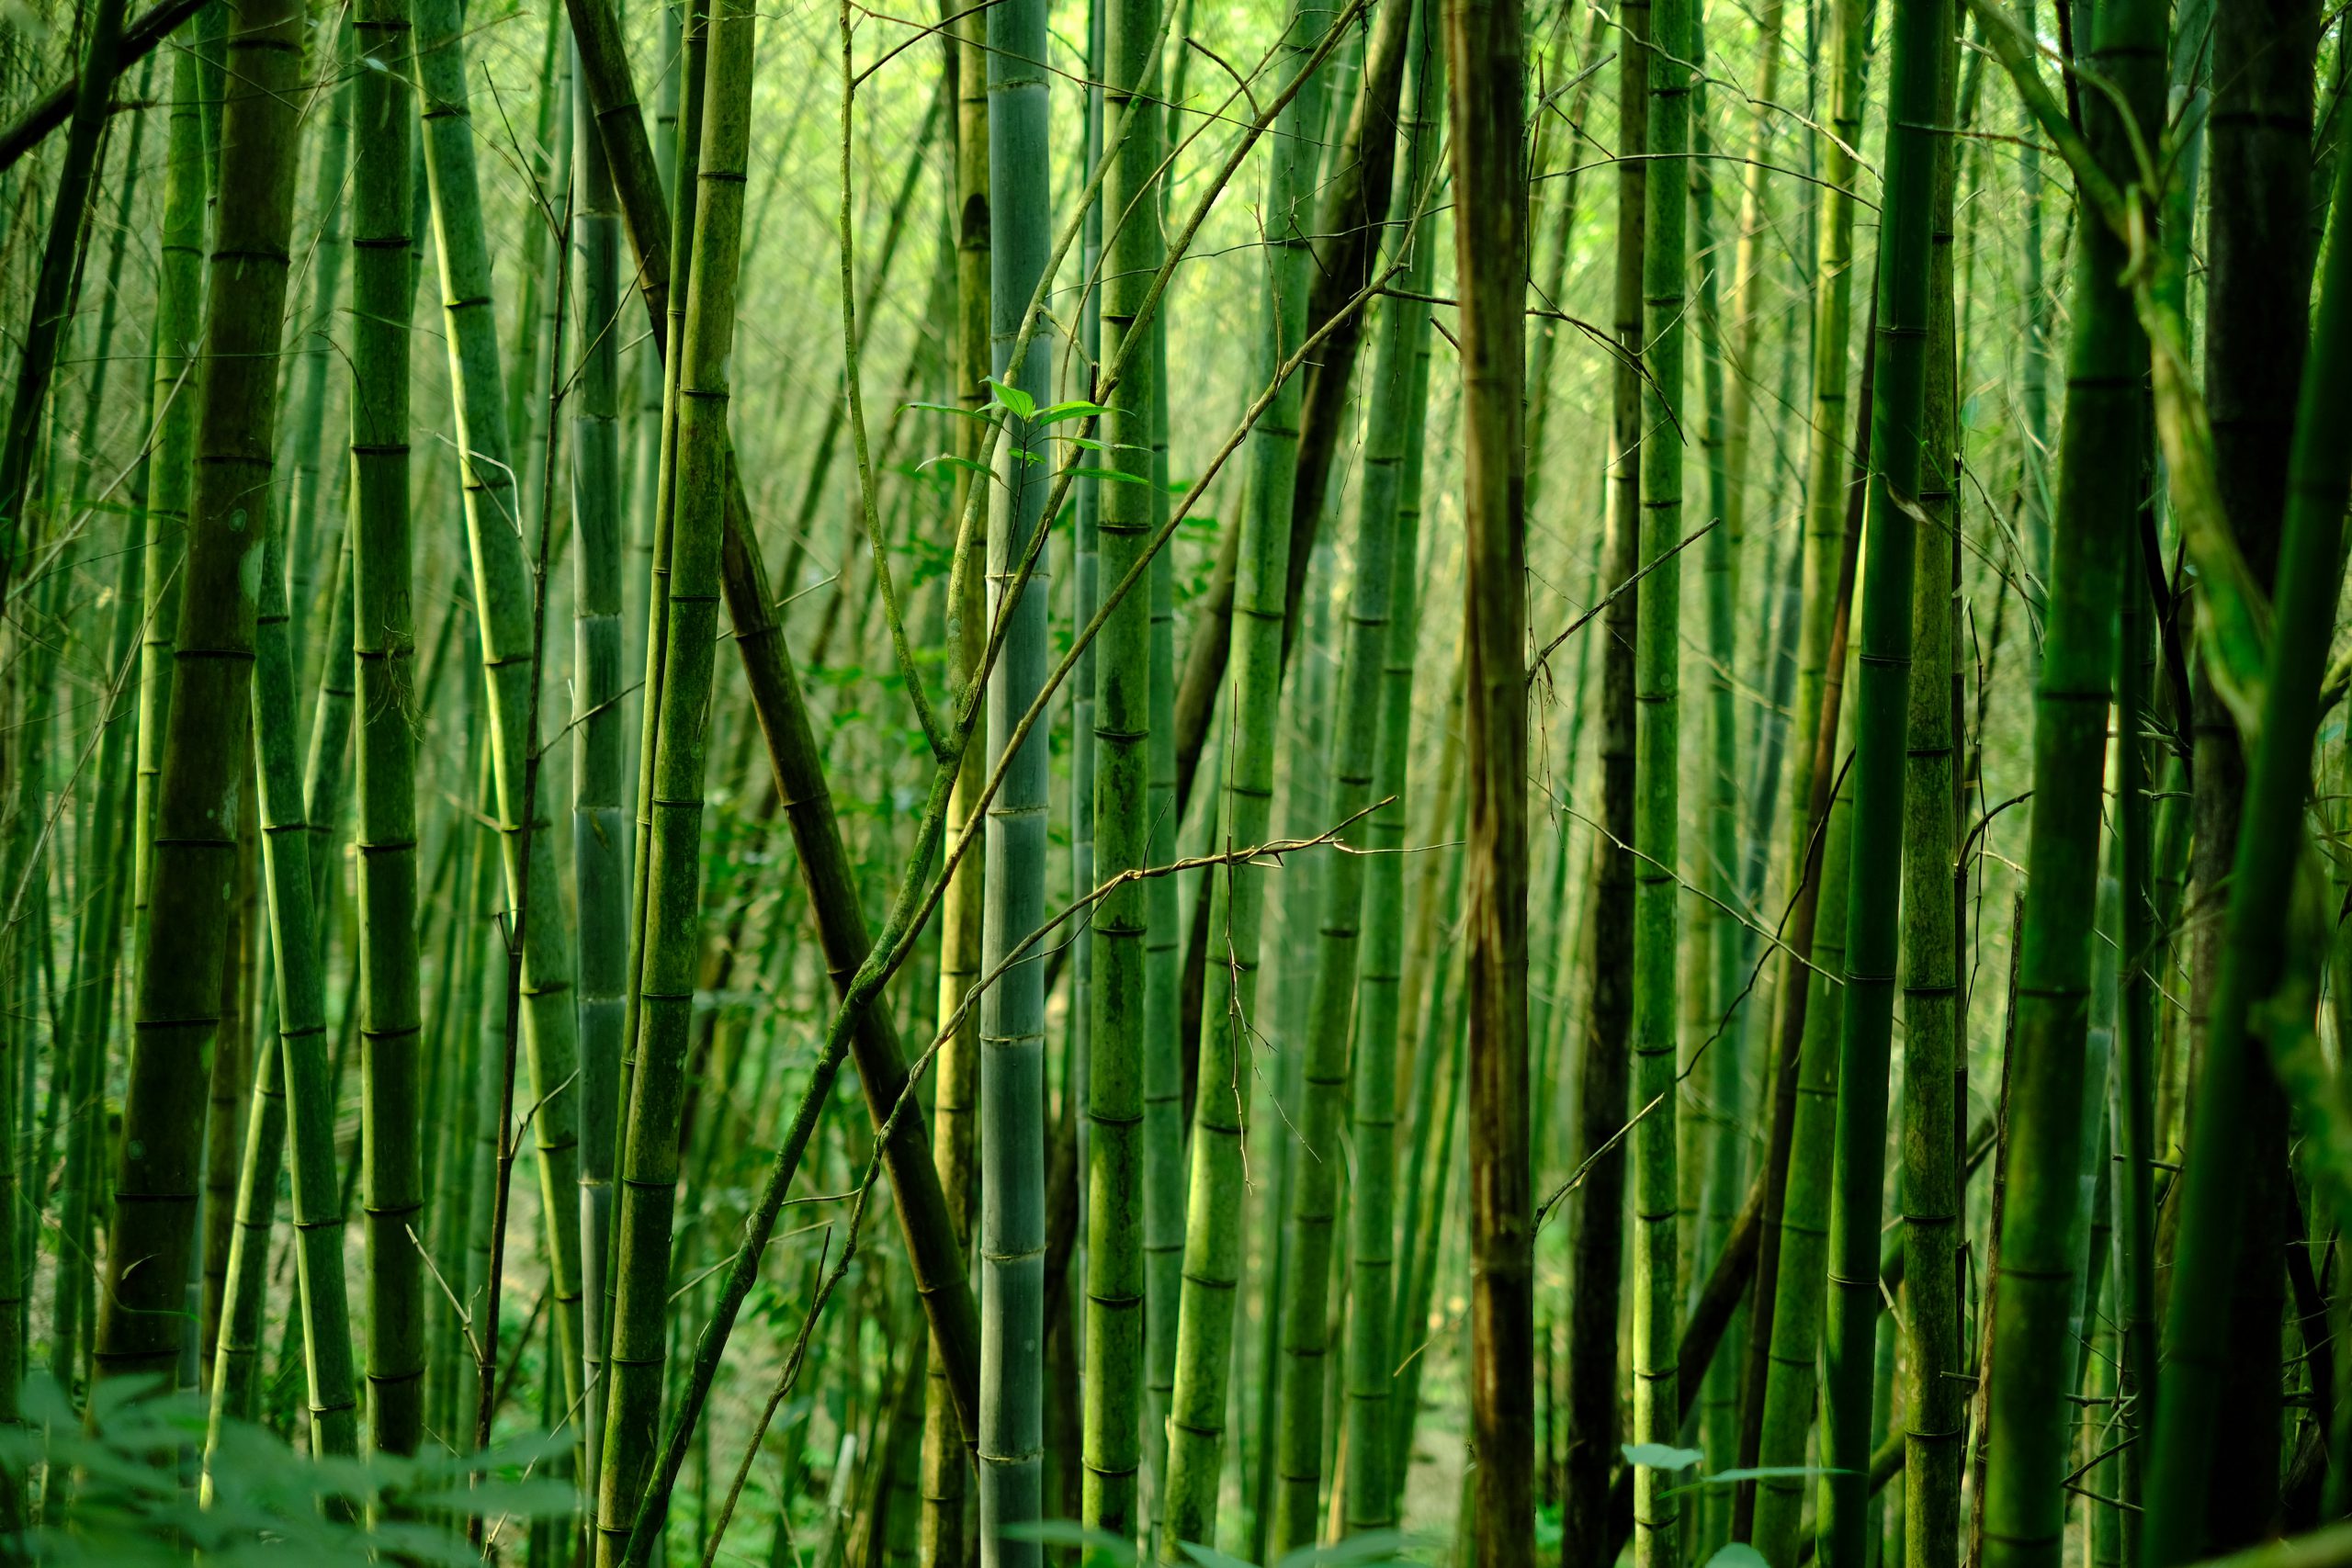 Bamboo Farming and Bio-Ethanol/Charcoal Manufacturing